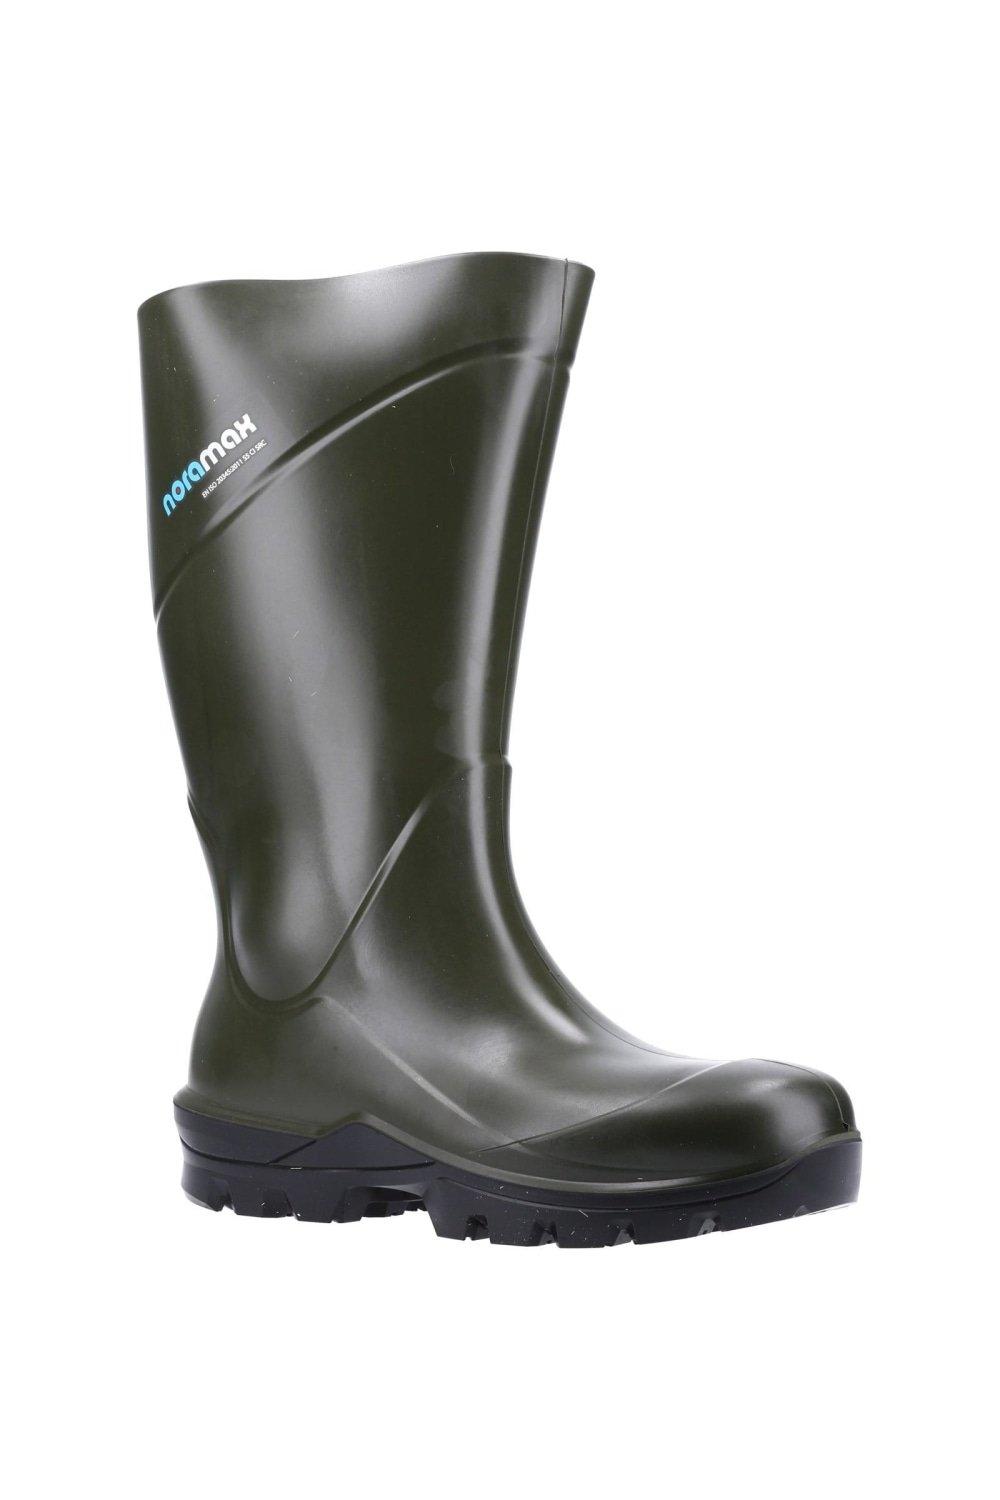 Pro S5 PU Safety Boots